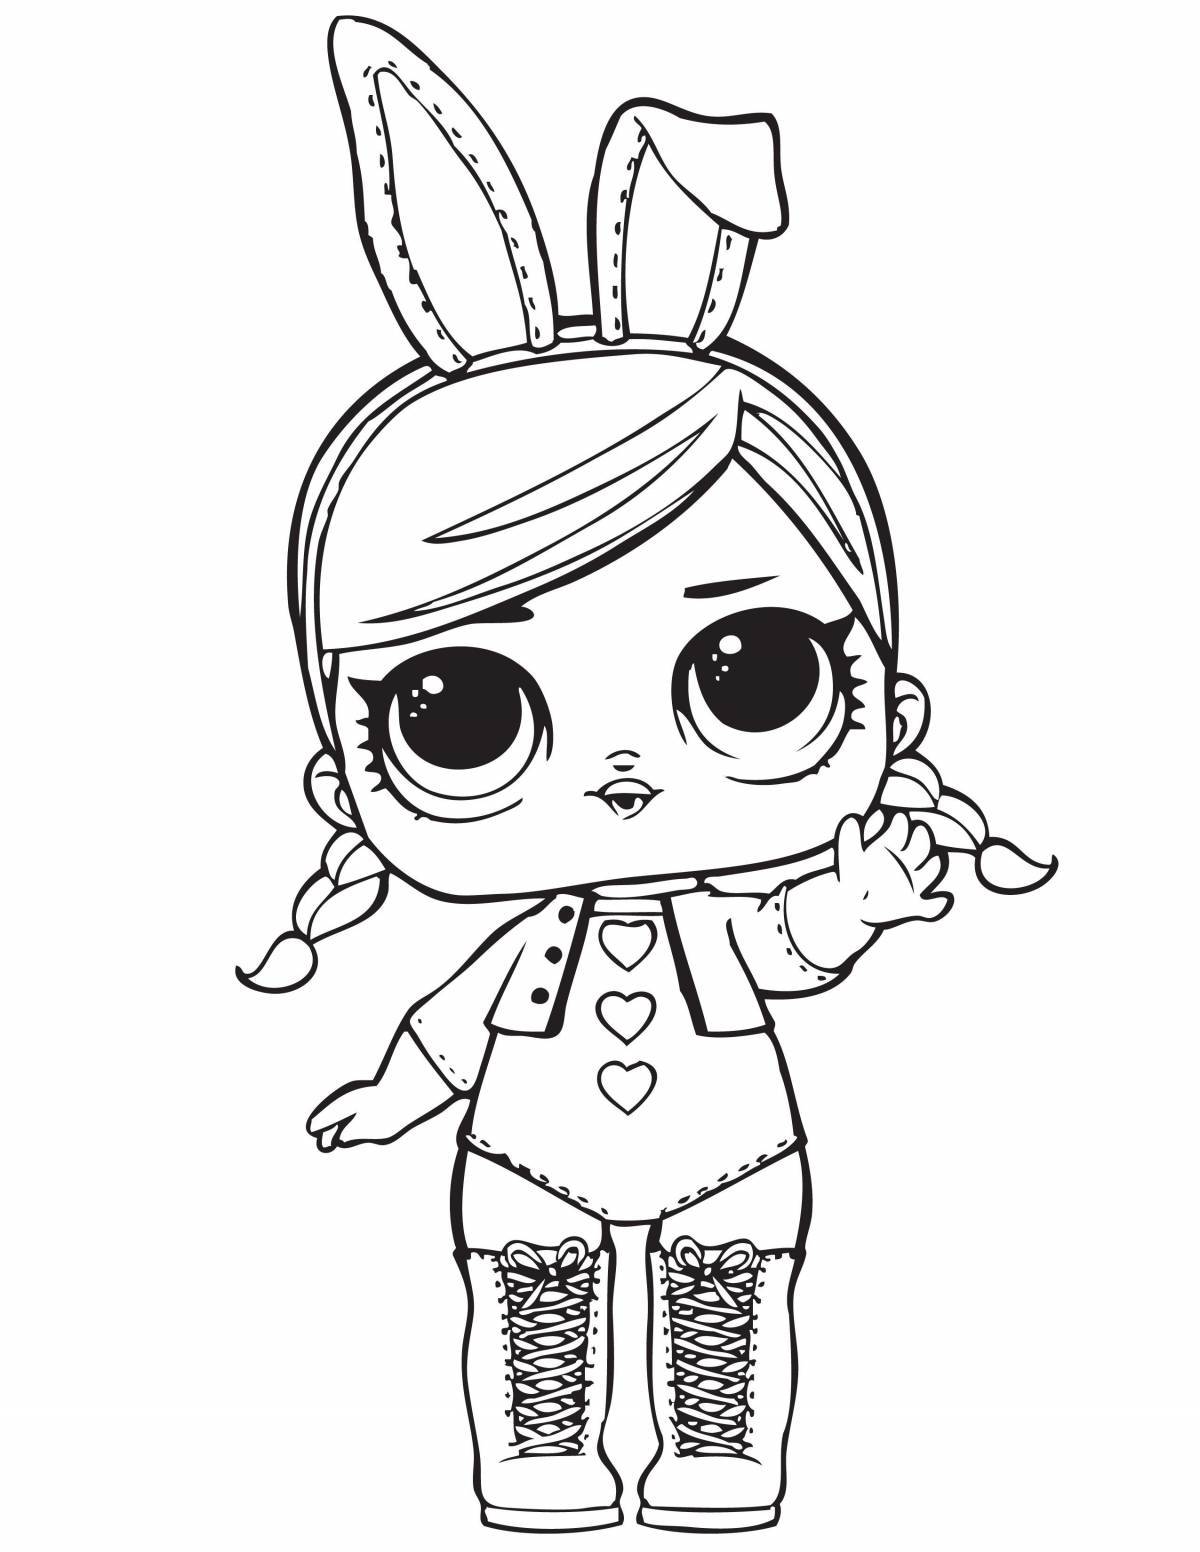 Coloring book funny lola doll